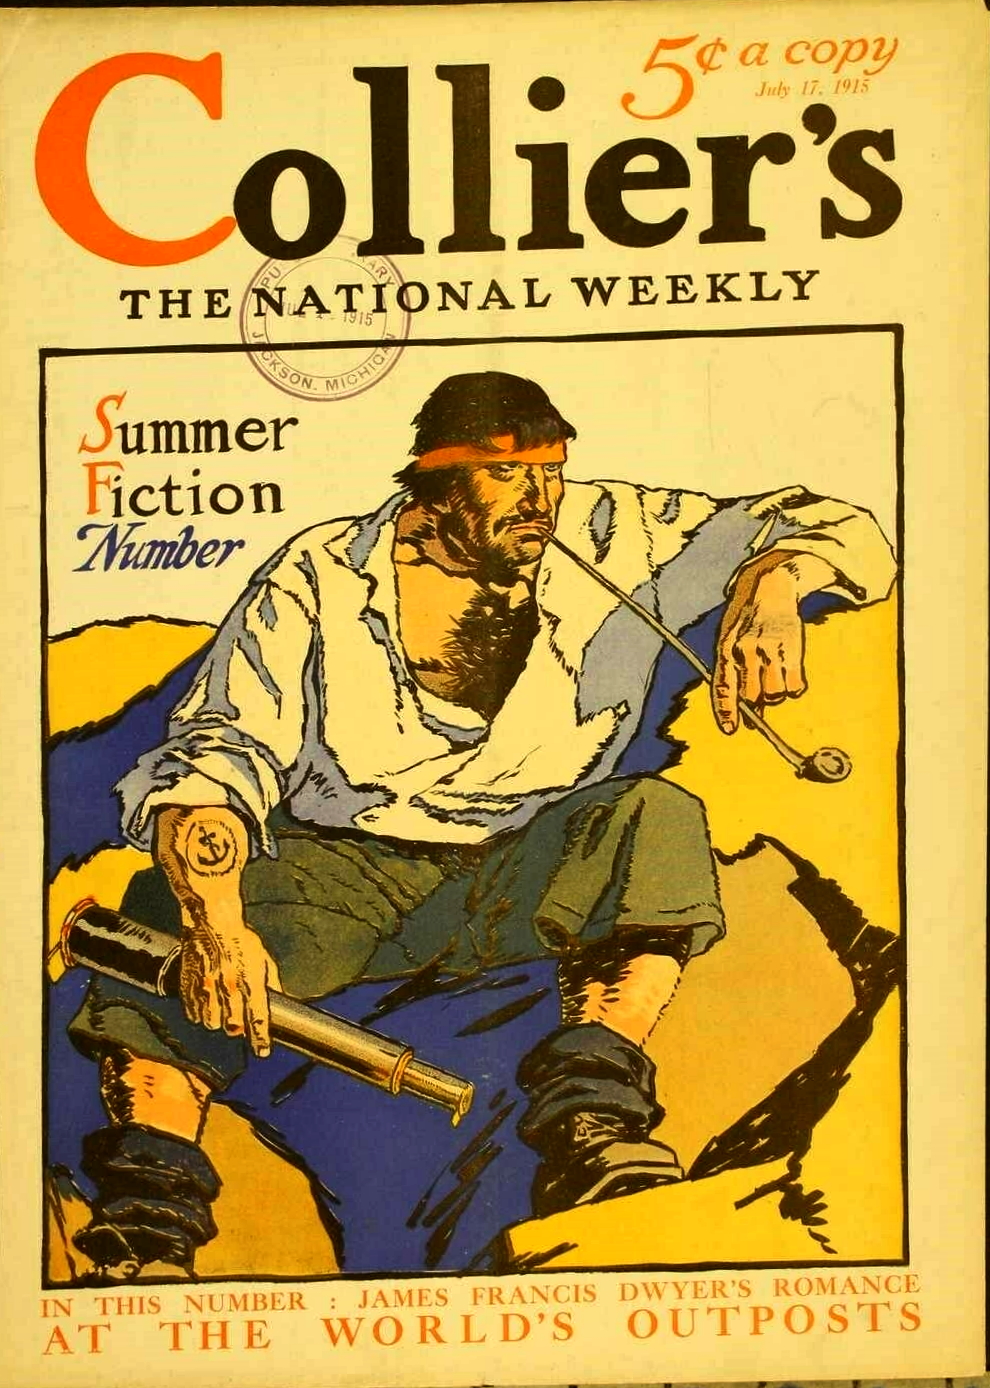 Collier's - July 27 1915